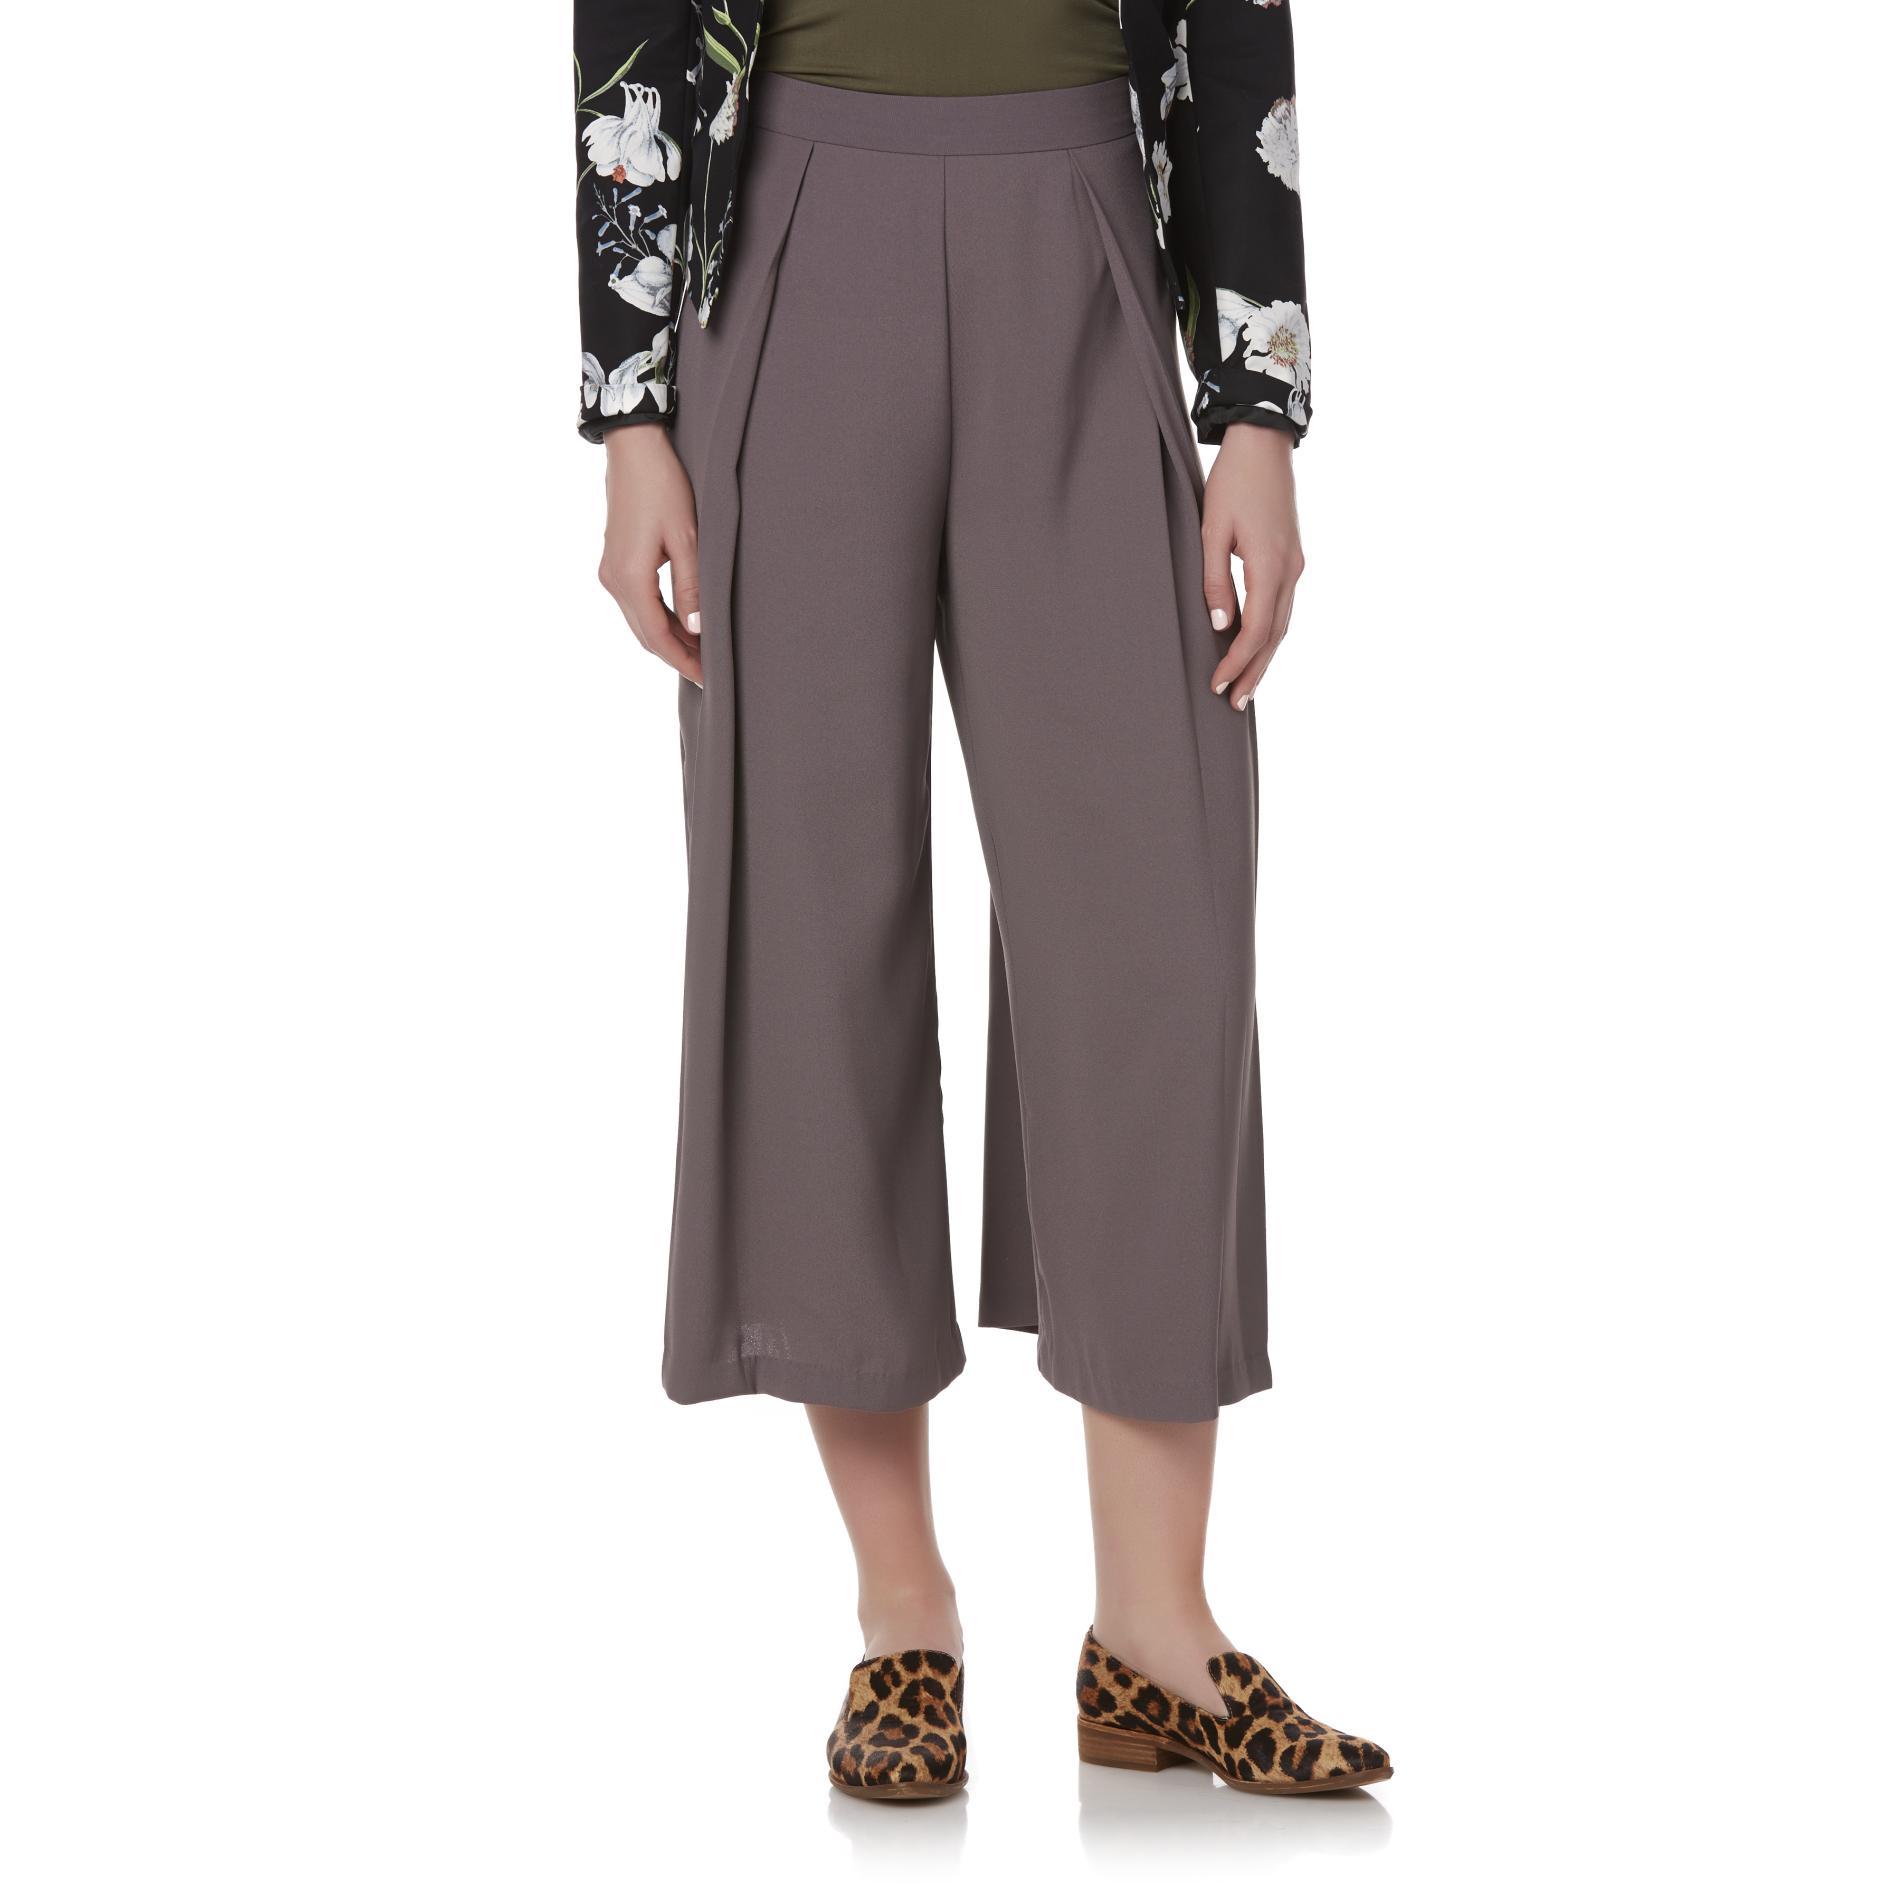 Simply Styled Petites' Culottes